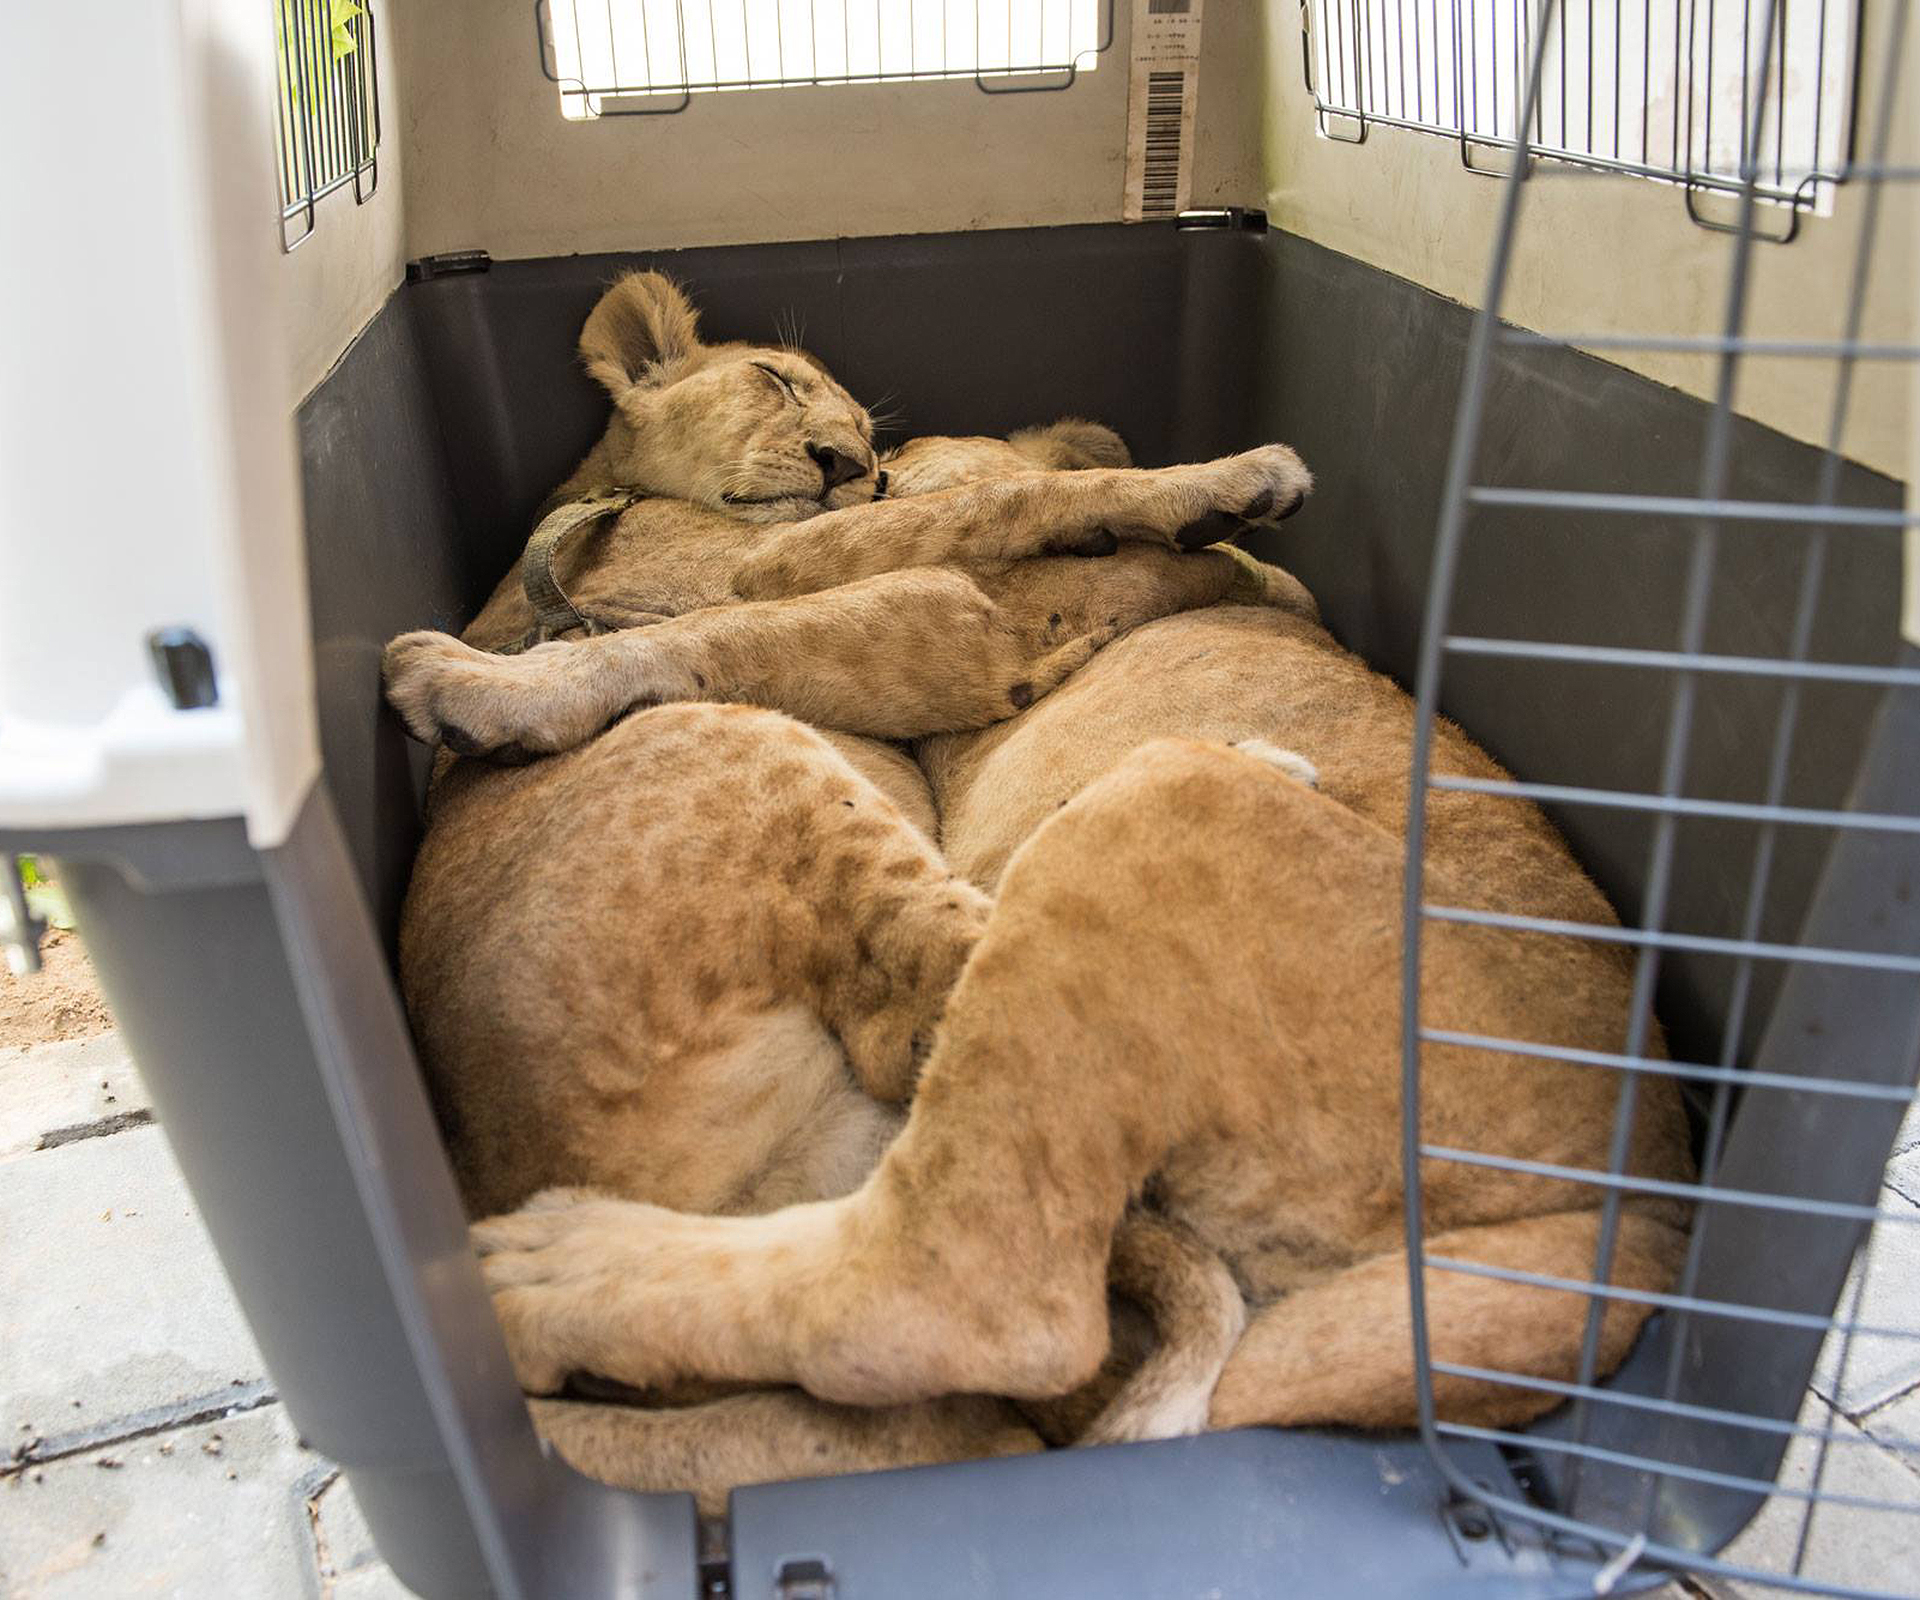 “Pet” lion cubs rescued from home in Gaza